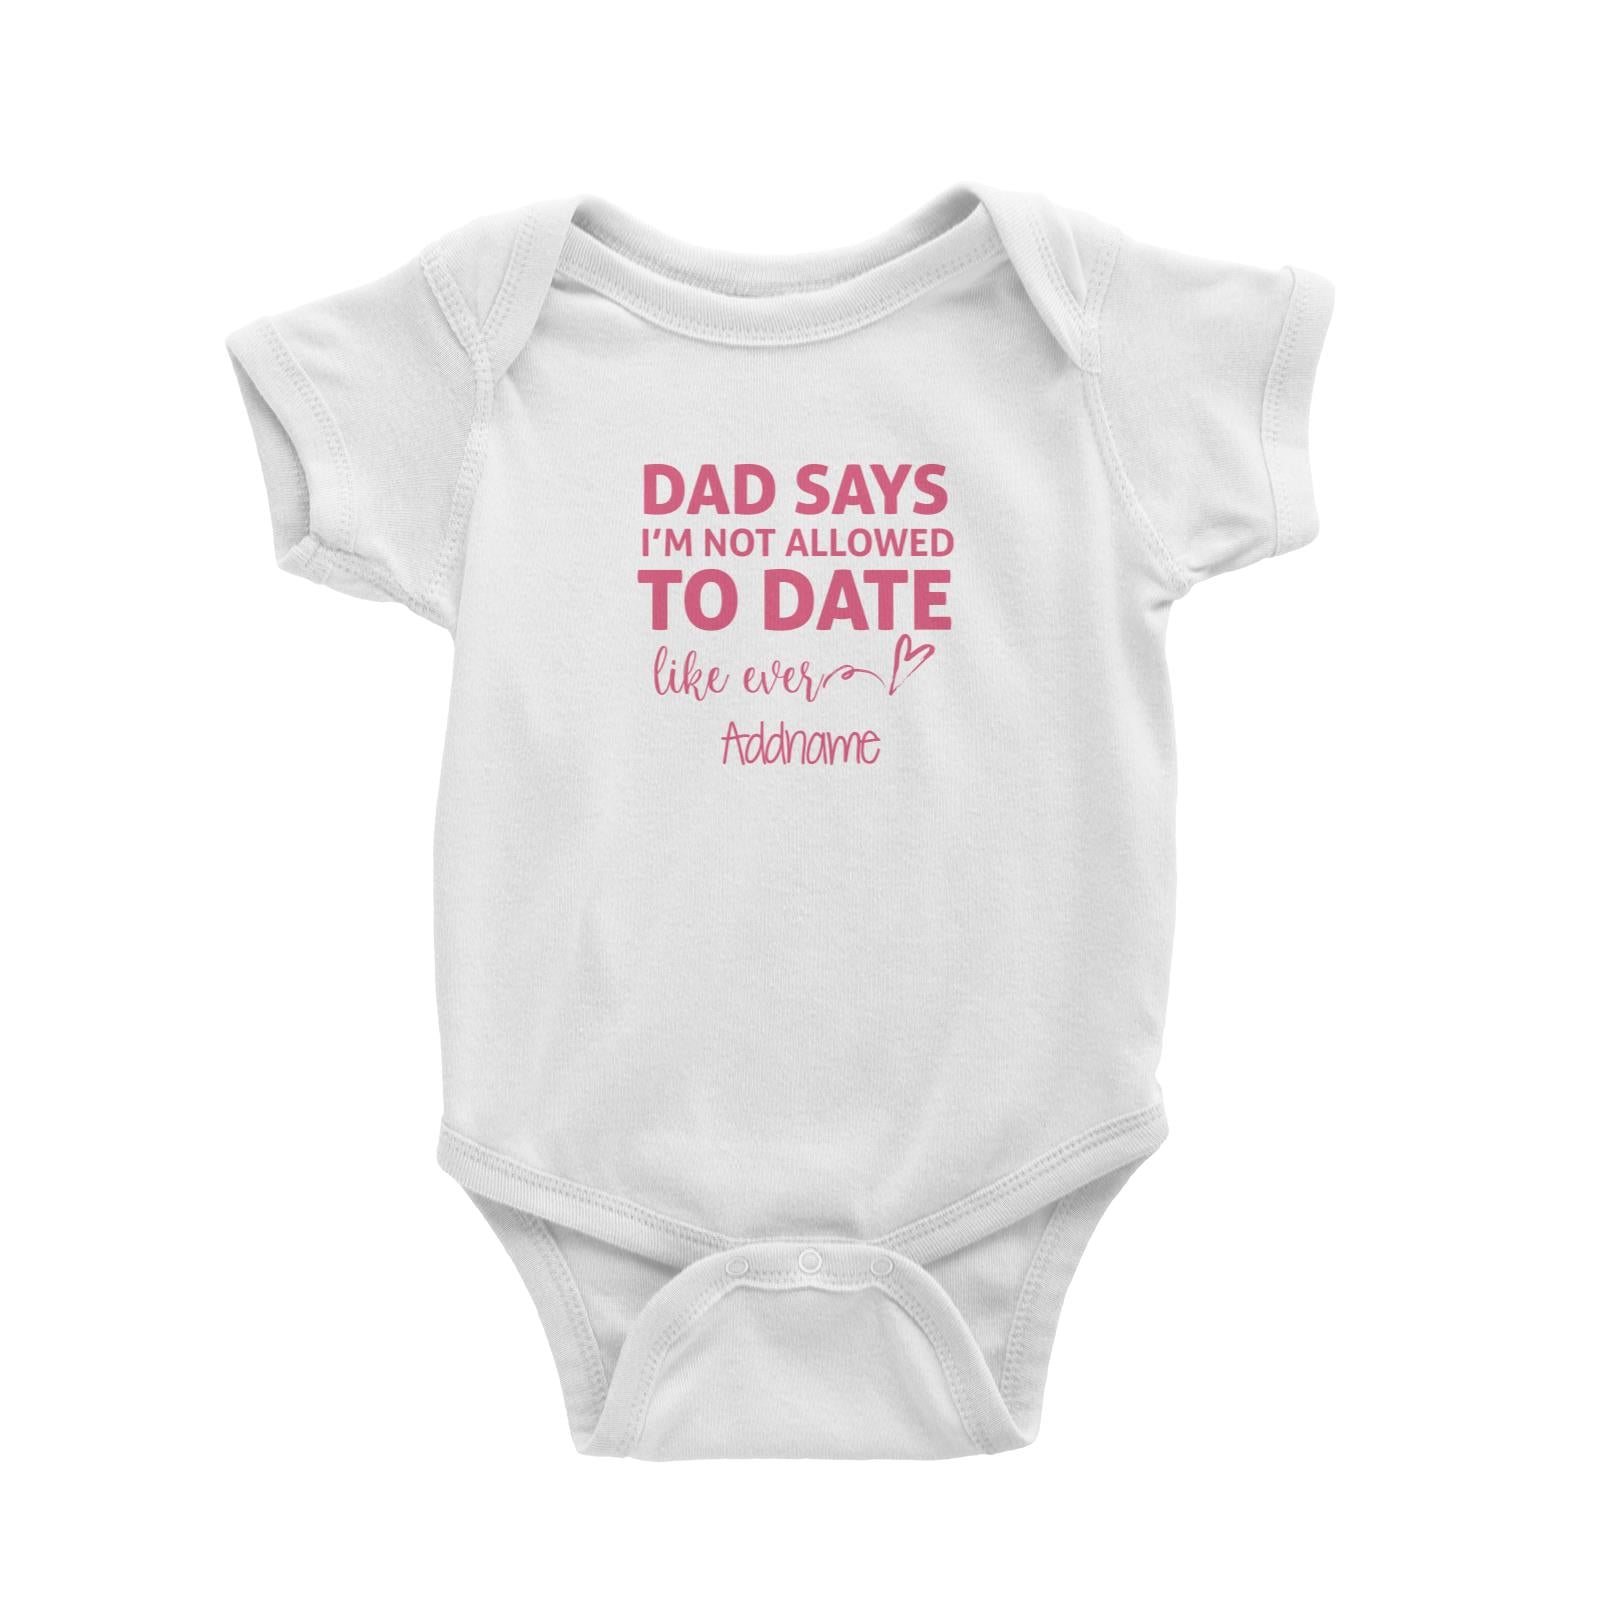 Dad Says Im Not Allowed To Date Like Ever Addname Baby Romper